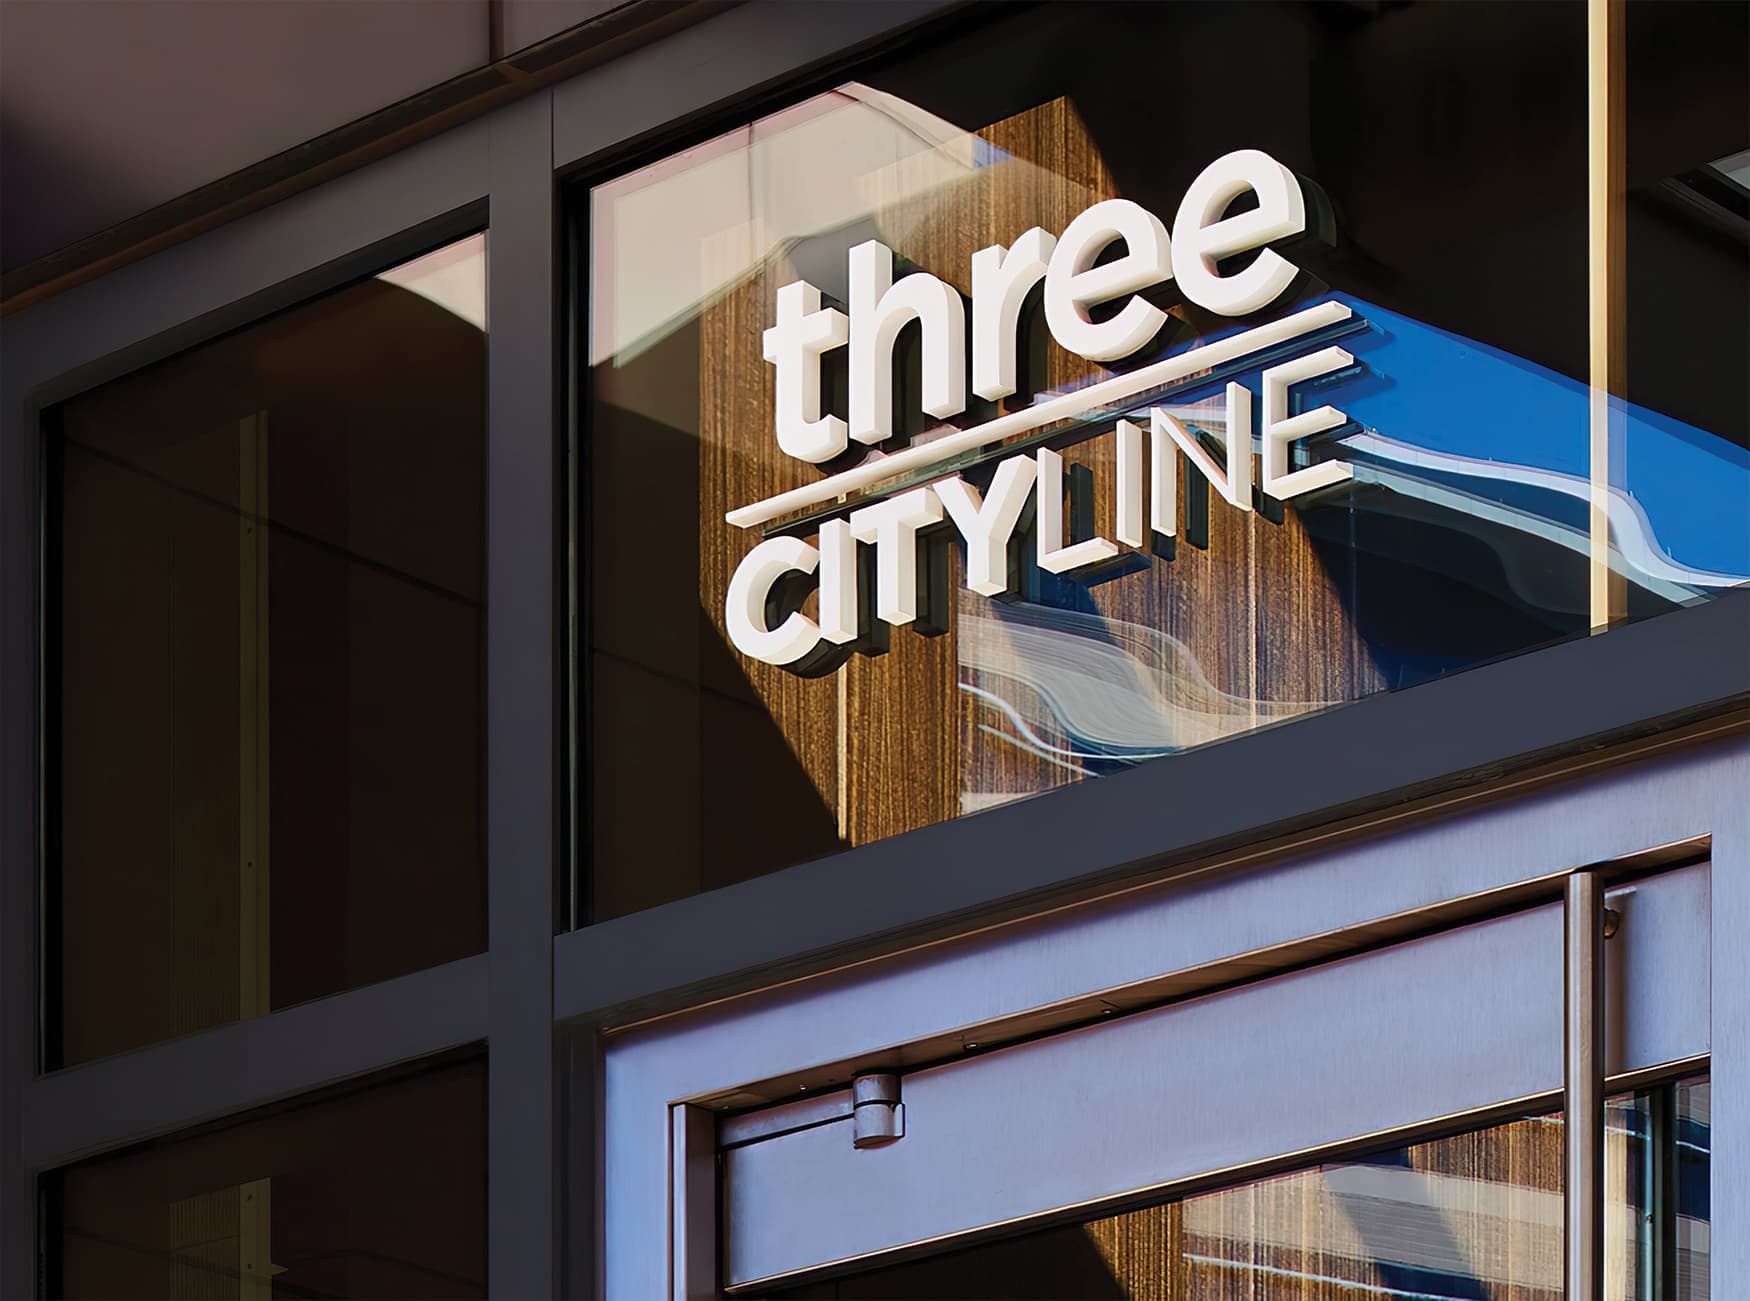 CityLine a mixed-use development in Dallas, Texas. Identity and wayfinding design. Project Identity Signage. Fascia Signage.